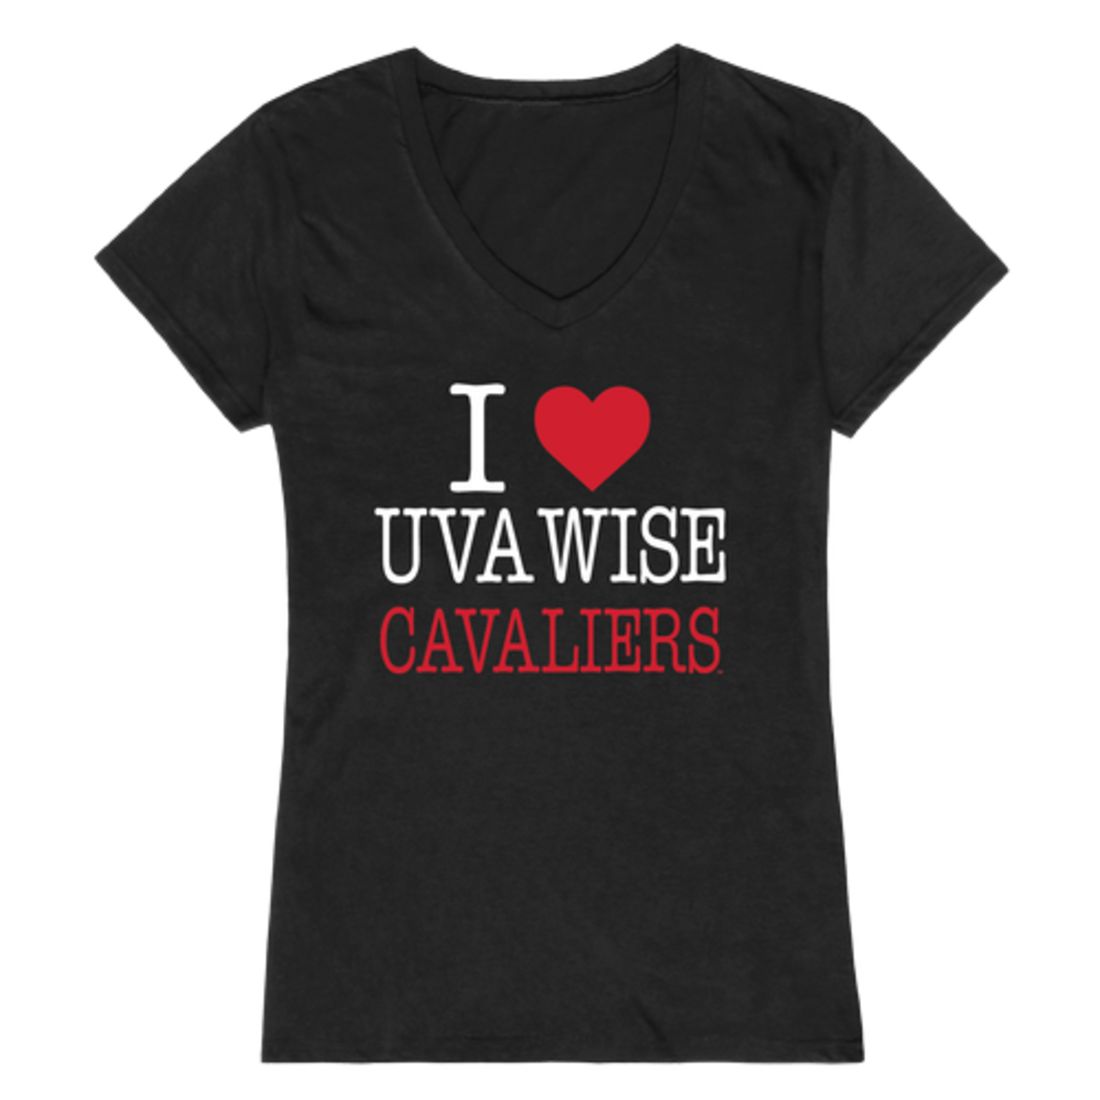 I Love University of Virginia's College at Wise Cavaliers Womens T-Shirt Tee